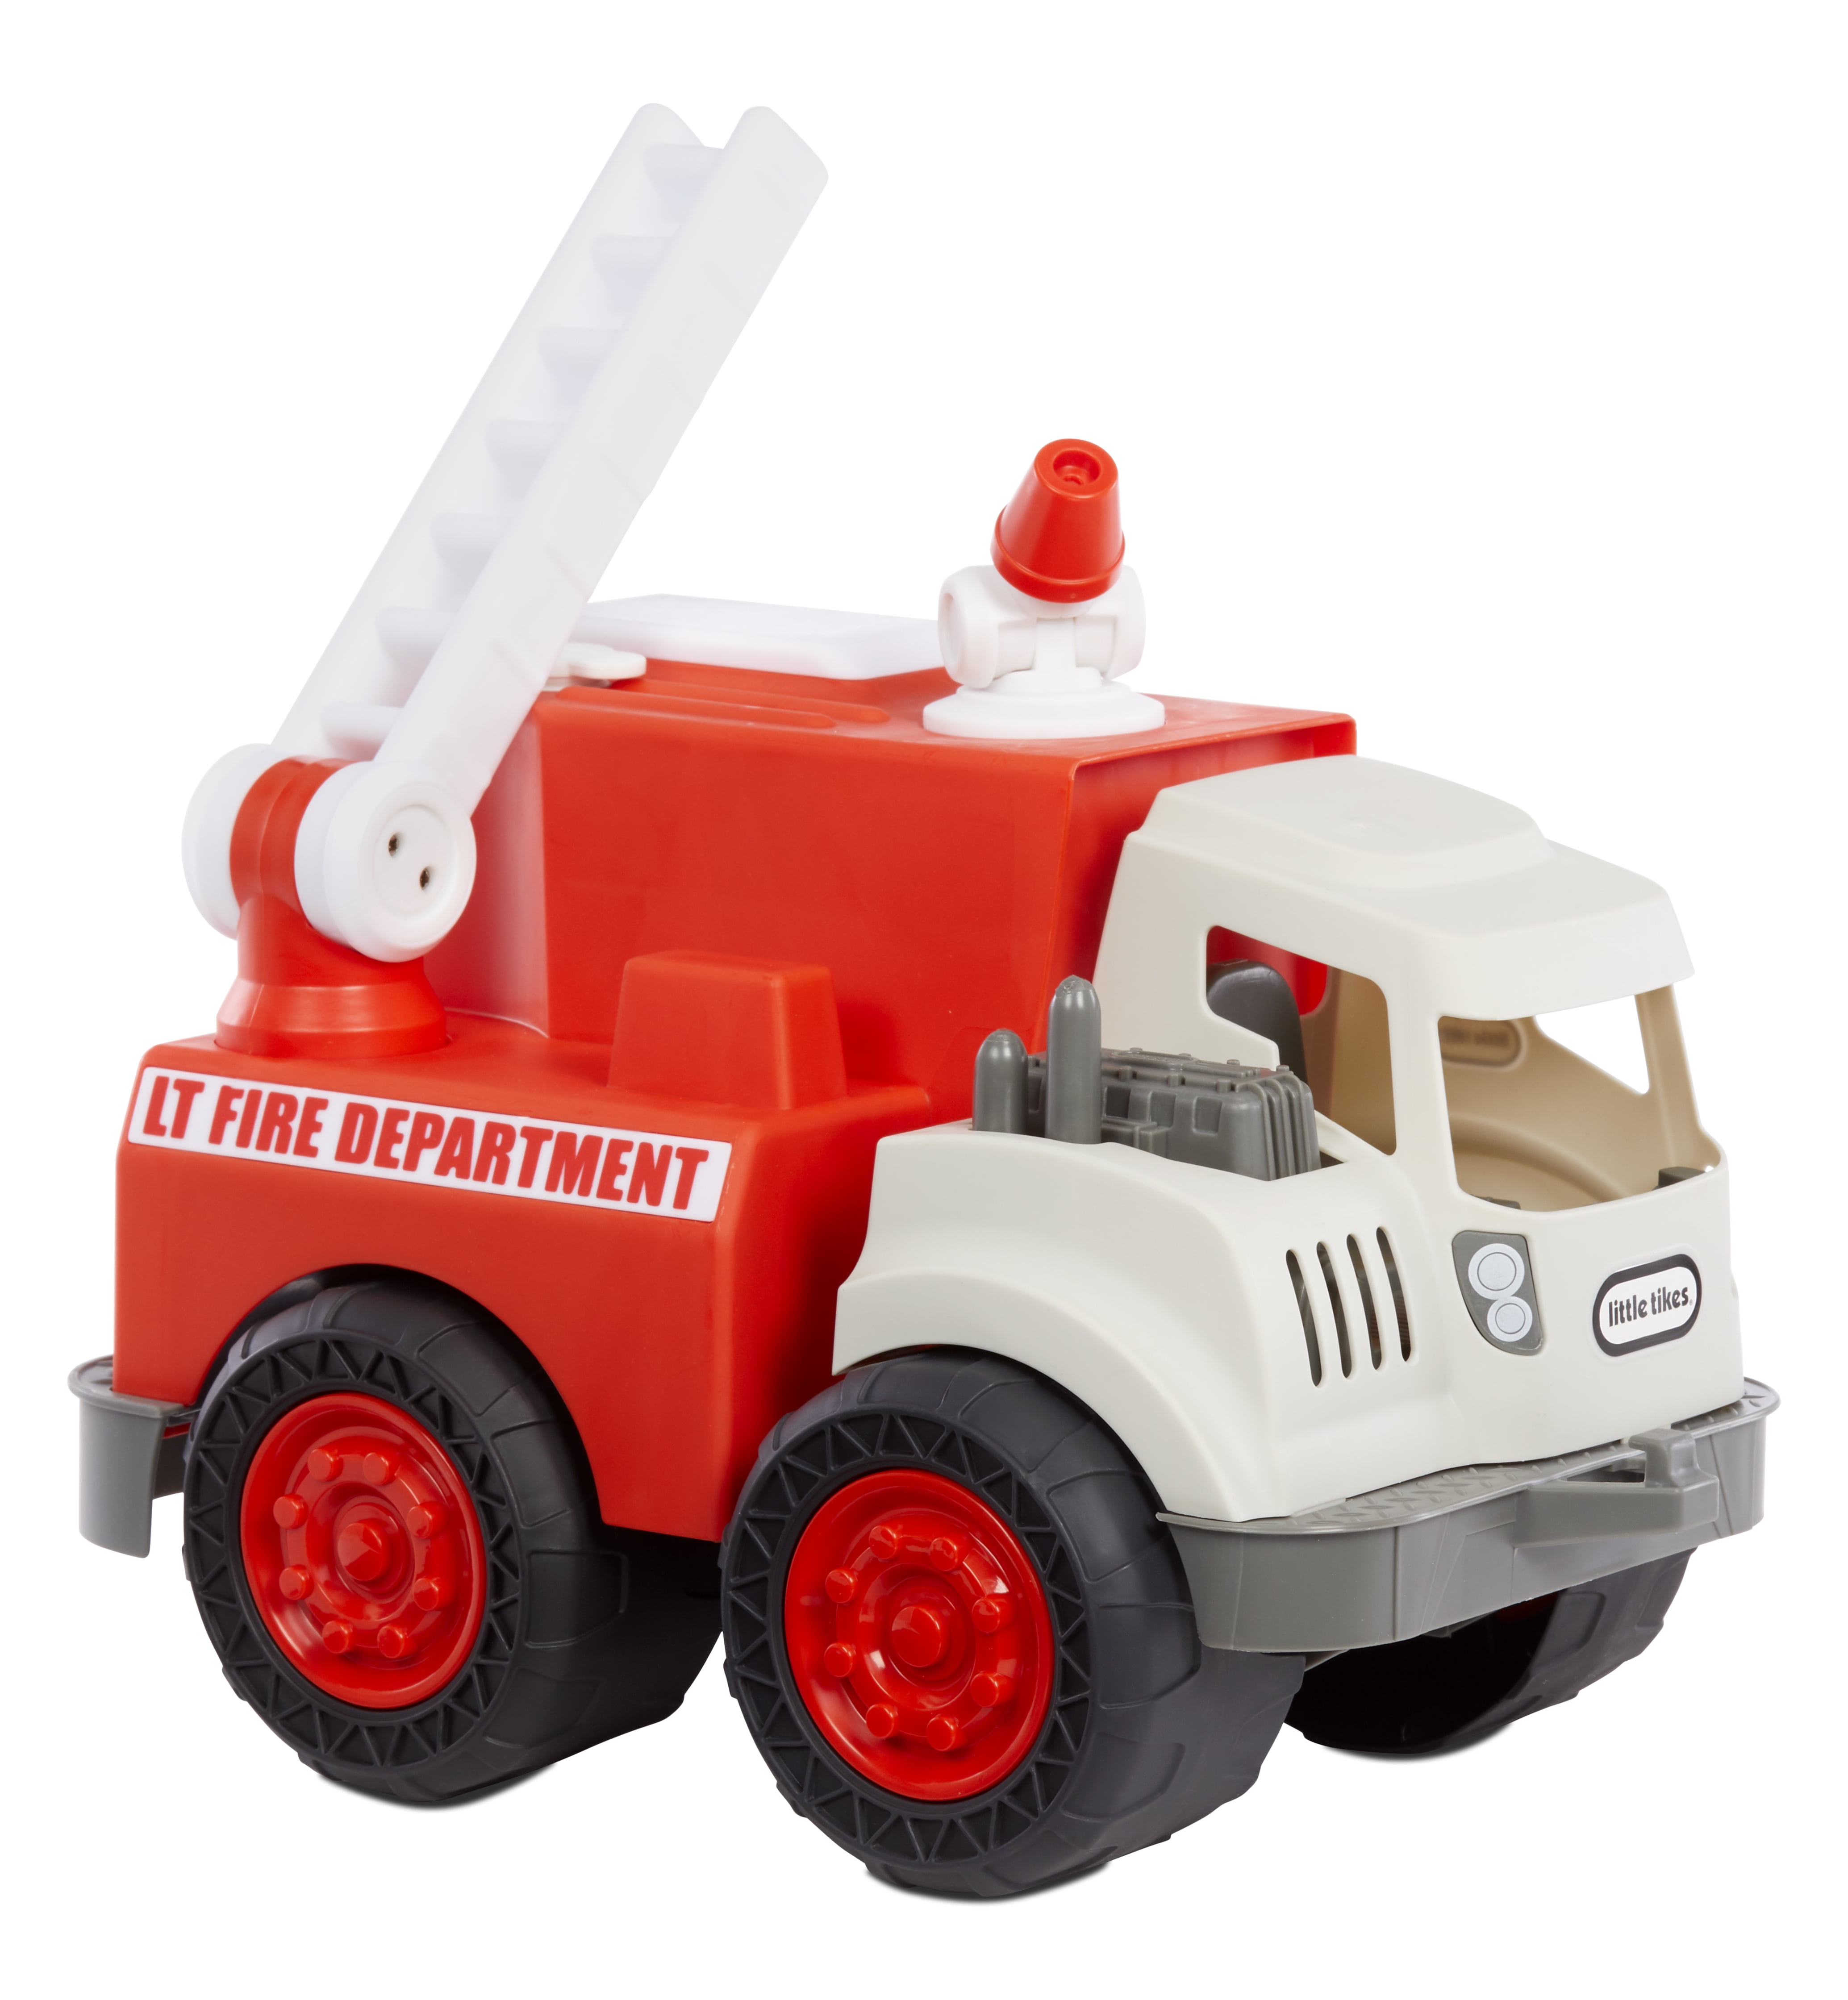 Red Fireman Engine Vehicle with Rescue Ladders for Indoor and Outdoor Imaginative Play Big Plastic Toy Fire Truck for Toddlers Boys and Girls Red 